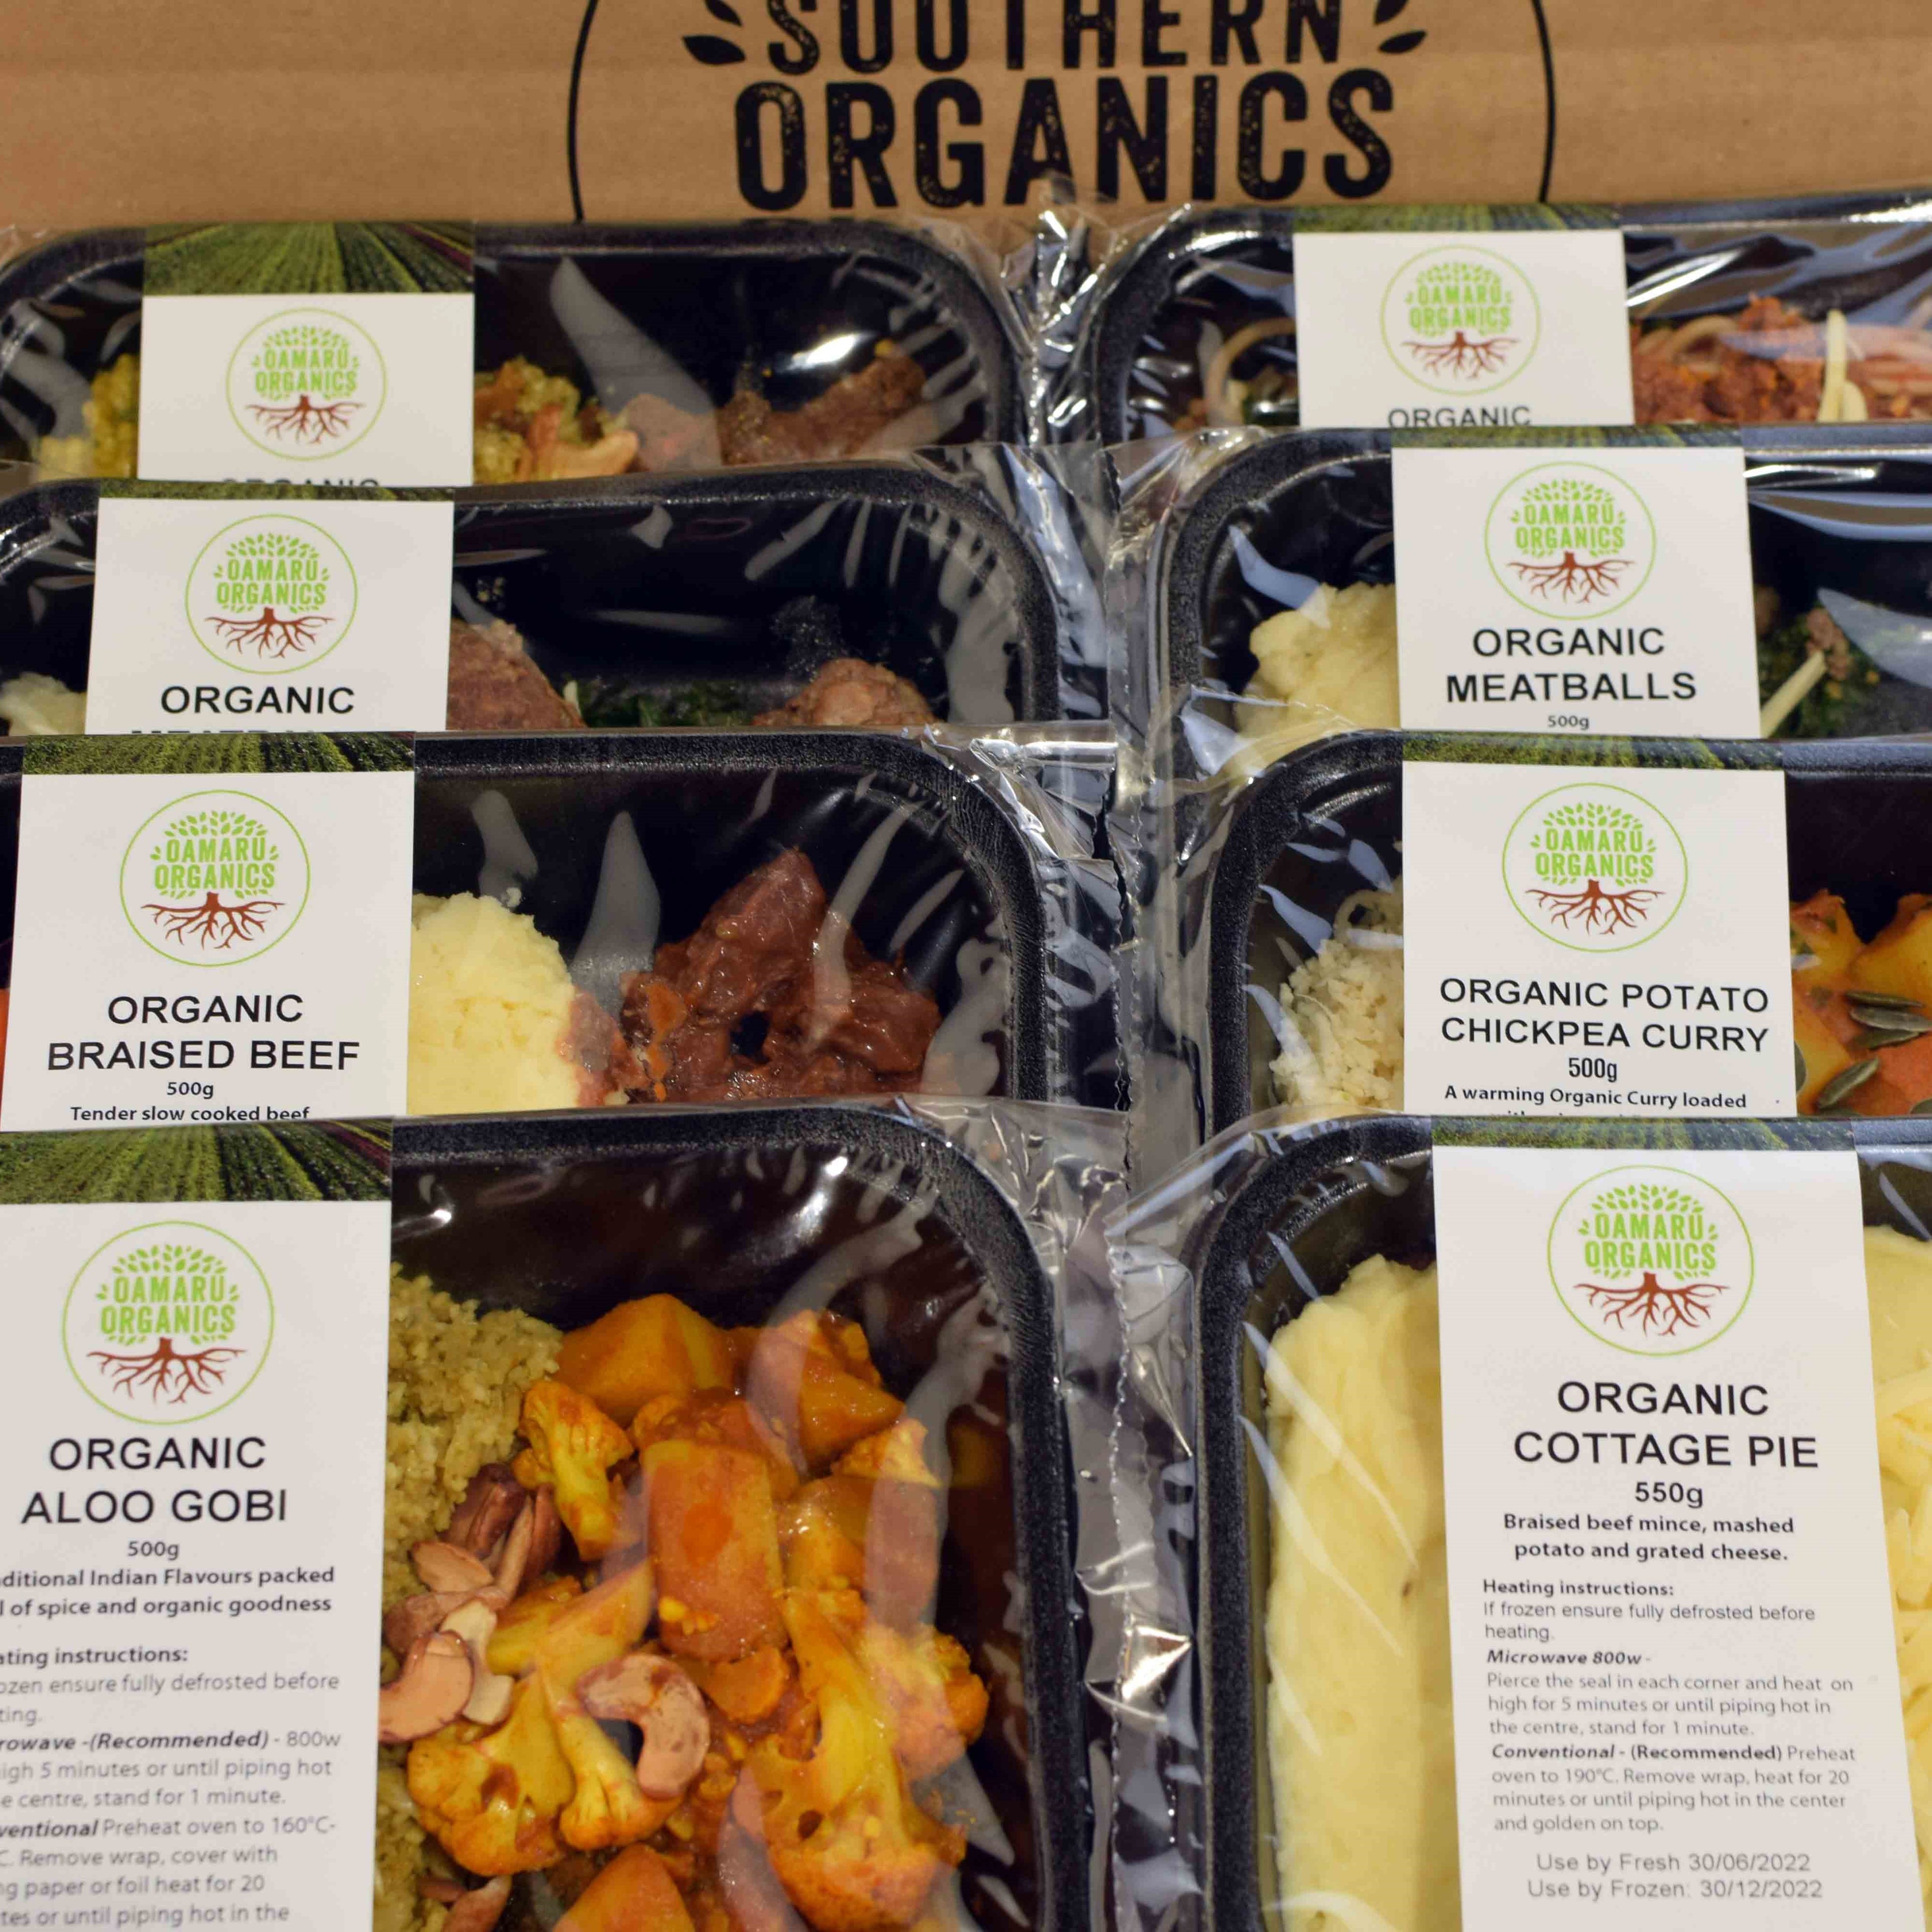 Organic ready to eat meals. cooked fresh. Delivered Fresh. Certified Organic Ingredients